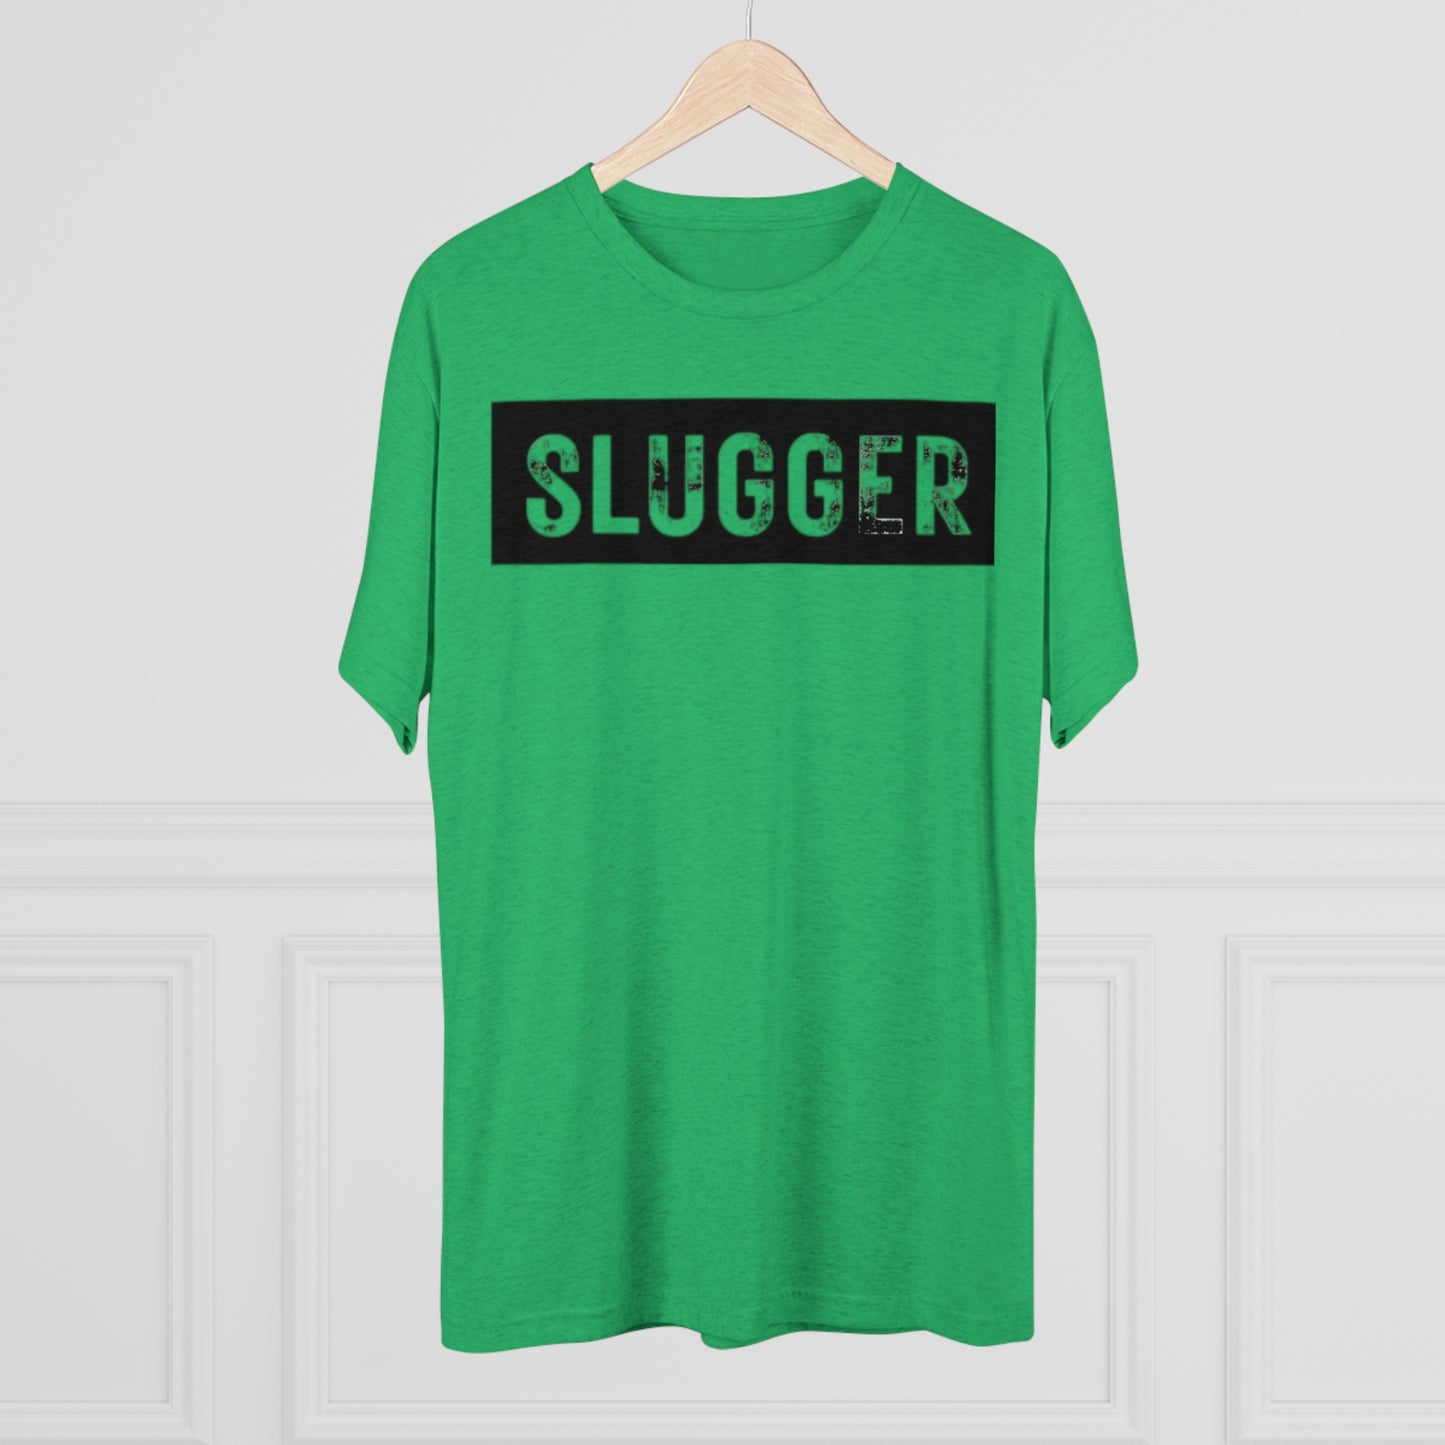 Slugger Block - Baseball Bliss Tri-Blend Tee: Unbelievably Soft Comfort with a Stylish Edge - Perfect for Baseball Enthusiasts!